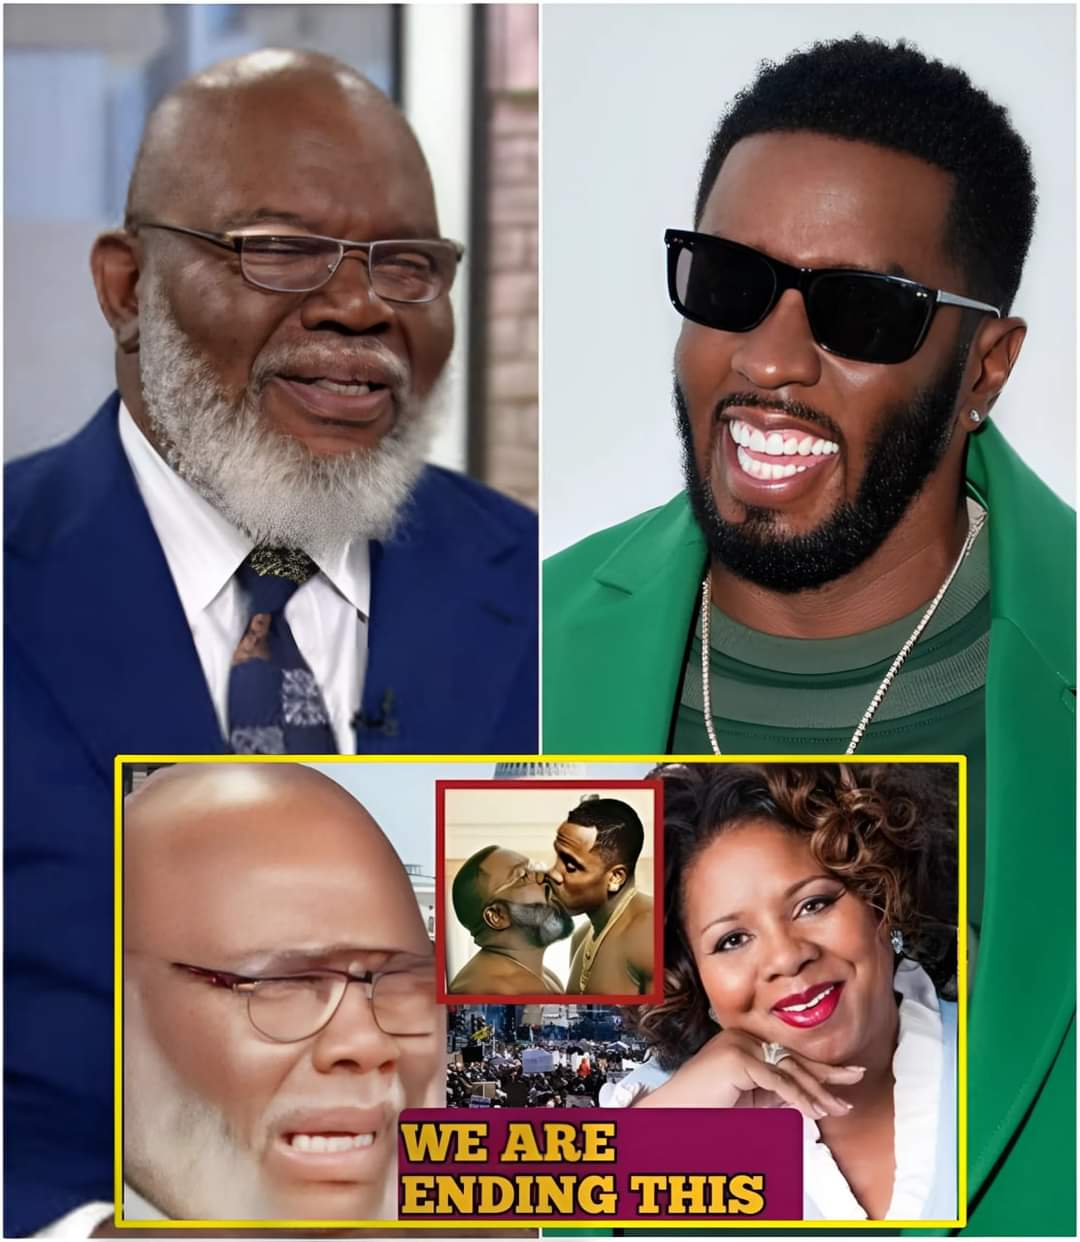 What?? Serita Jakes sign Divorce papers after discovering TD jakes affairs with Diddy